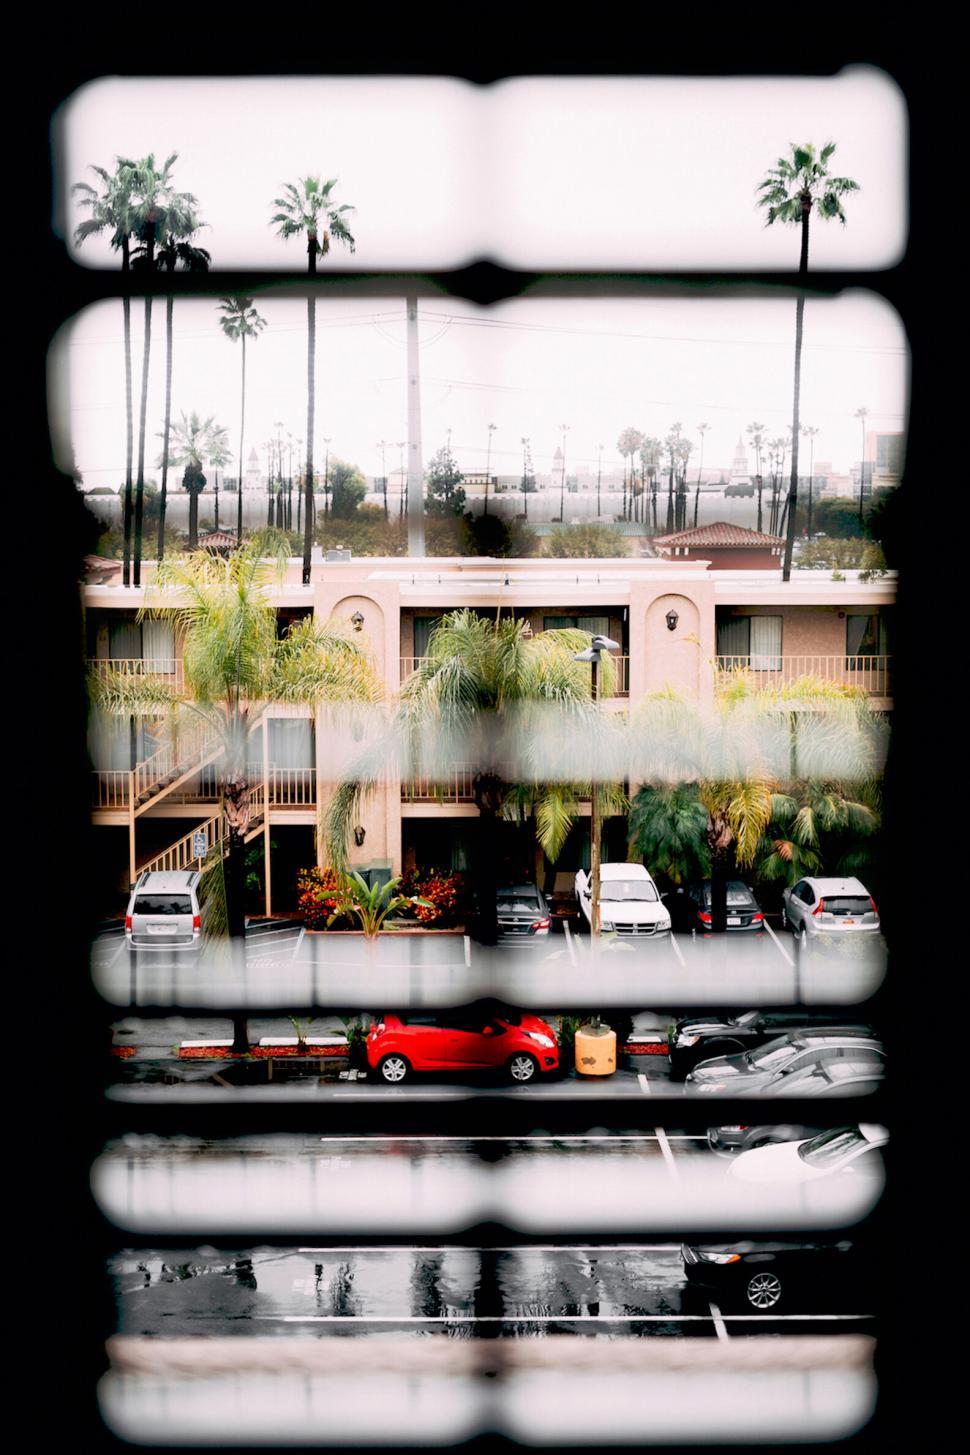 Free Image of View Through Blinds on a Rainy Day 